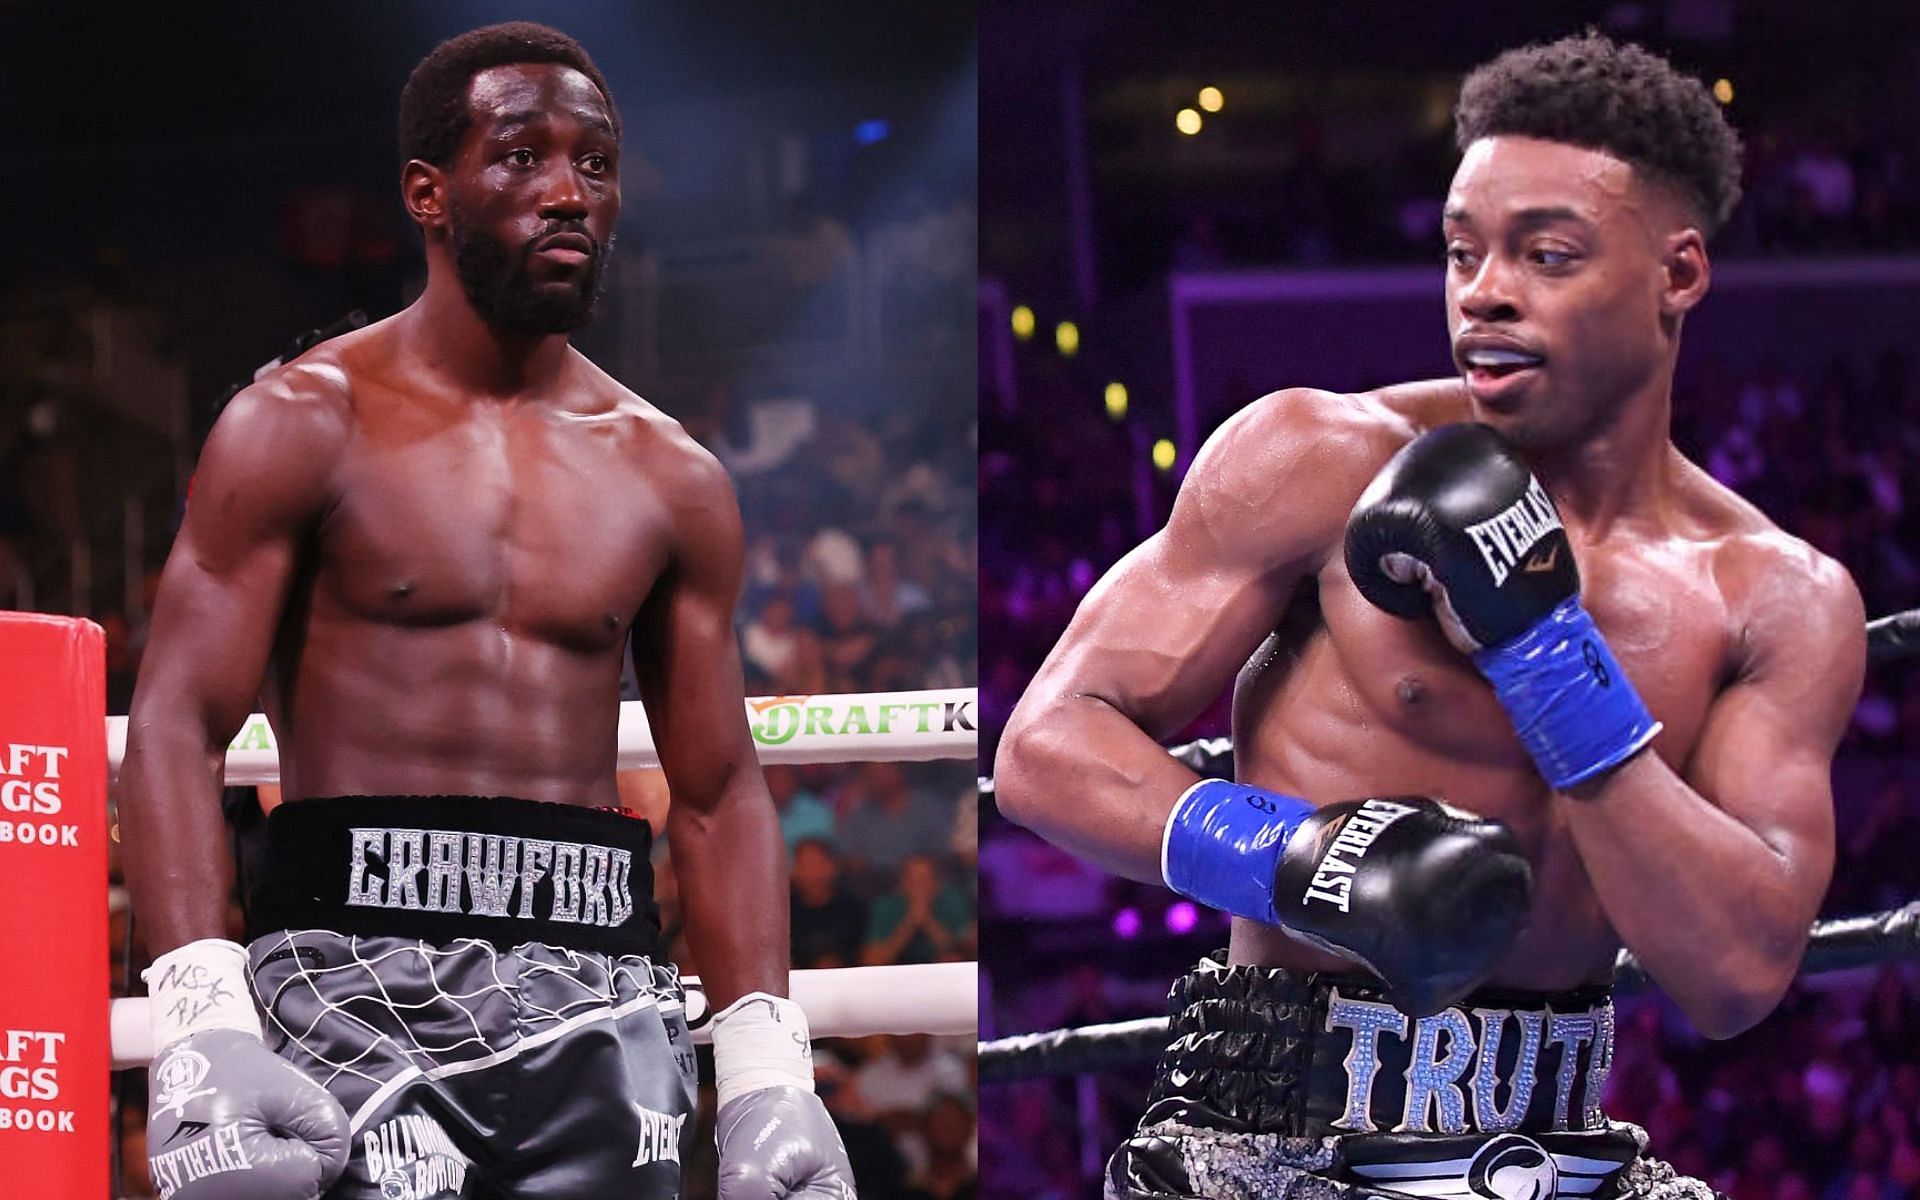 Terence Crawford (left) and Errol Spence Jr. (right) [Images Courtesy: @GettyImages]